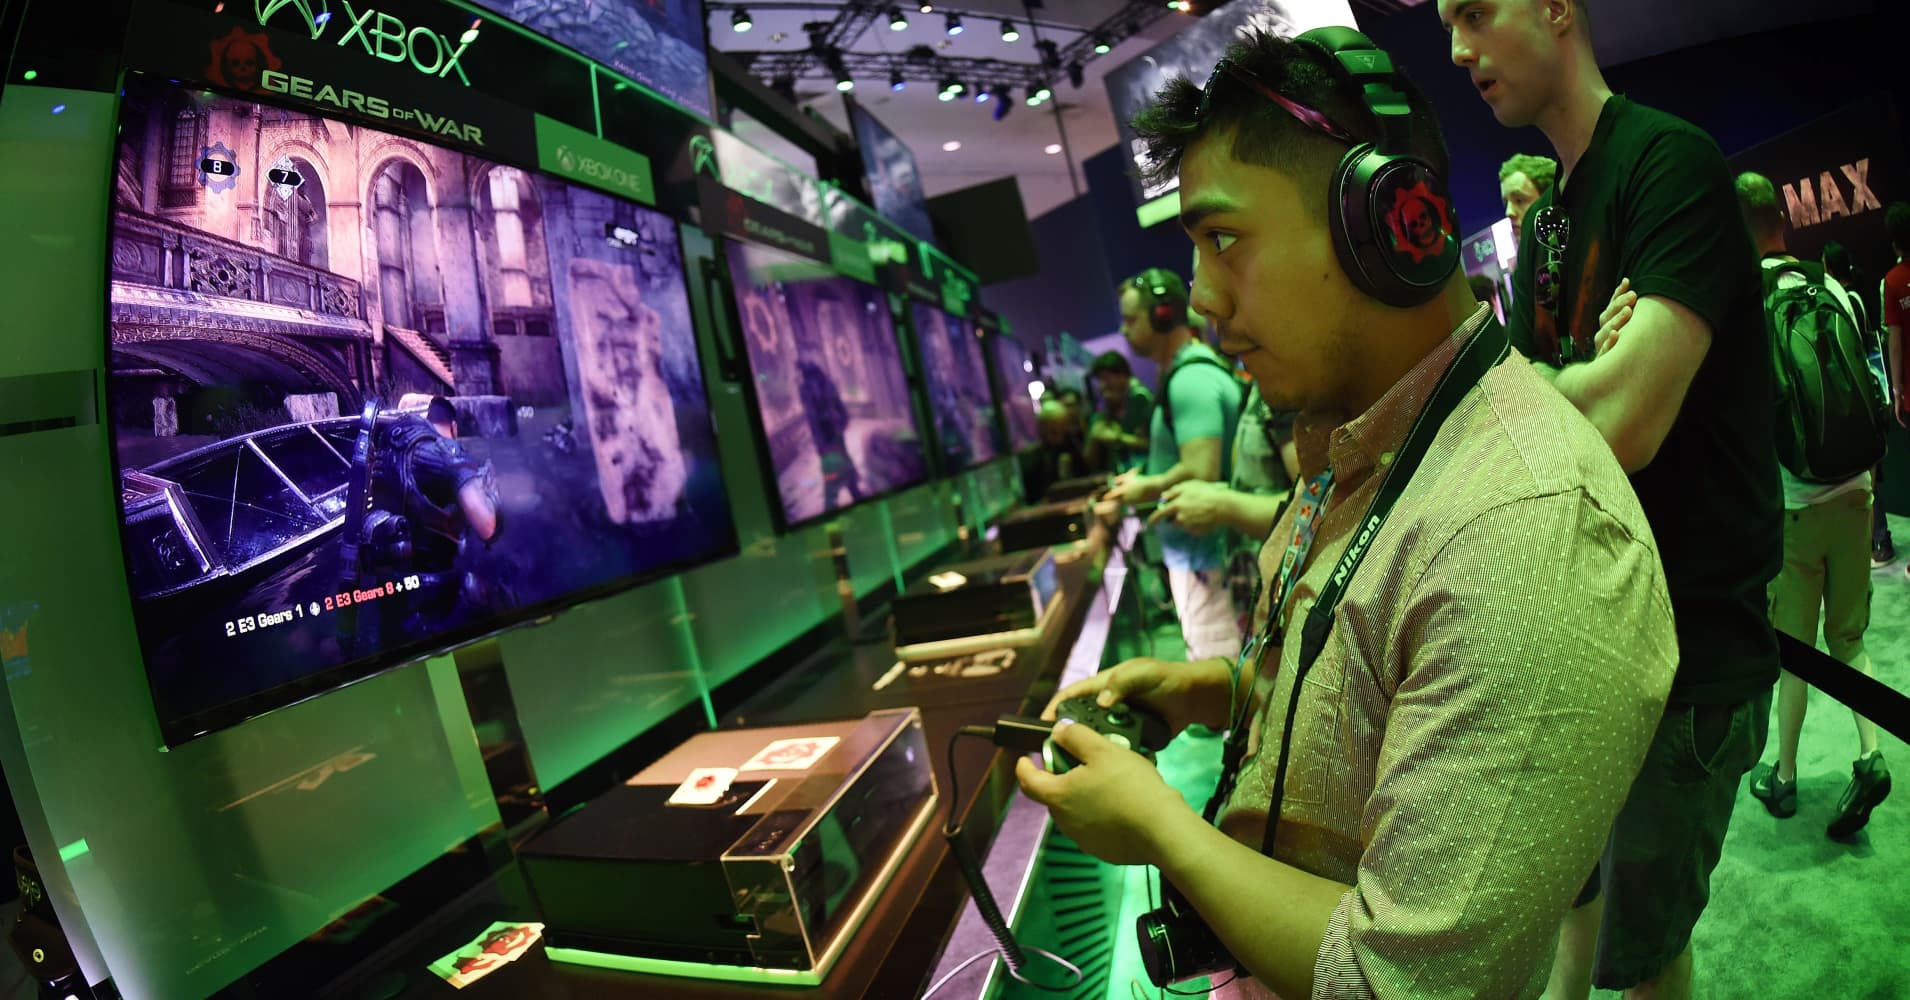 E3 preview: Video game industry makes a big gamble